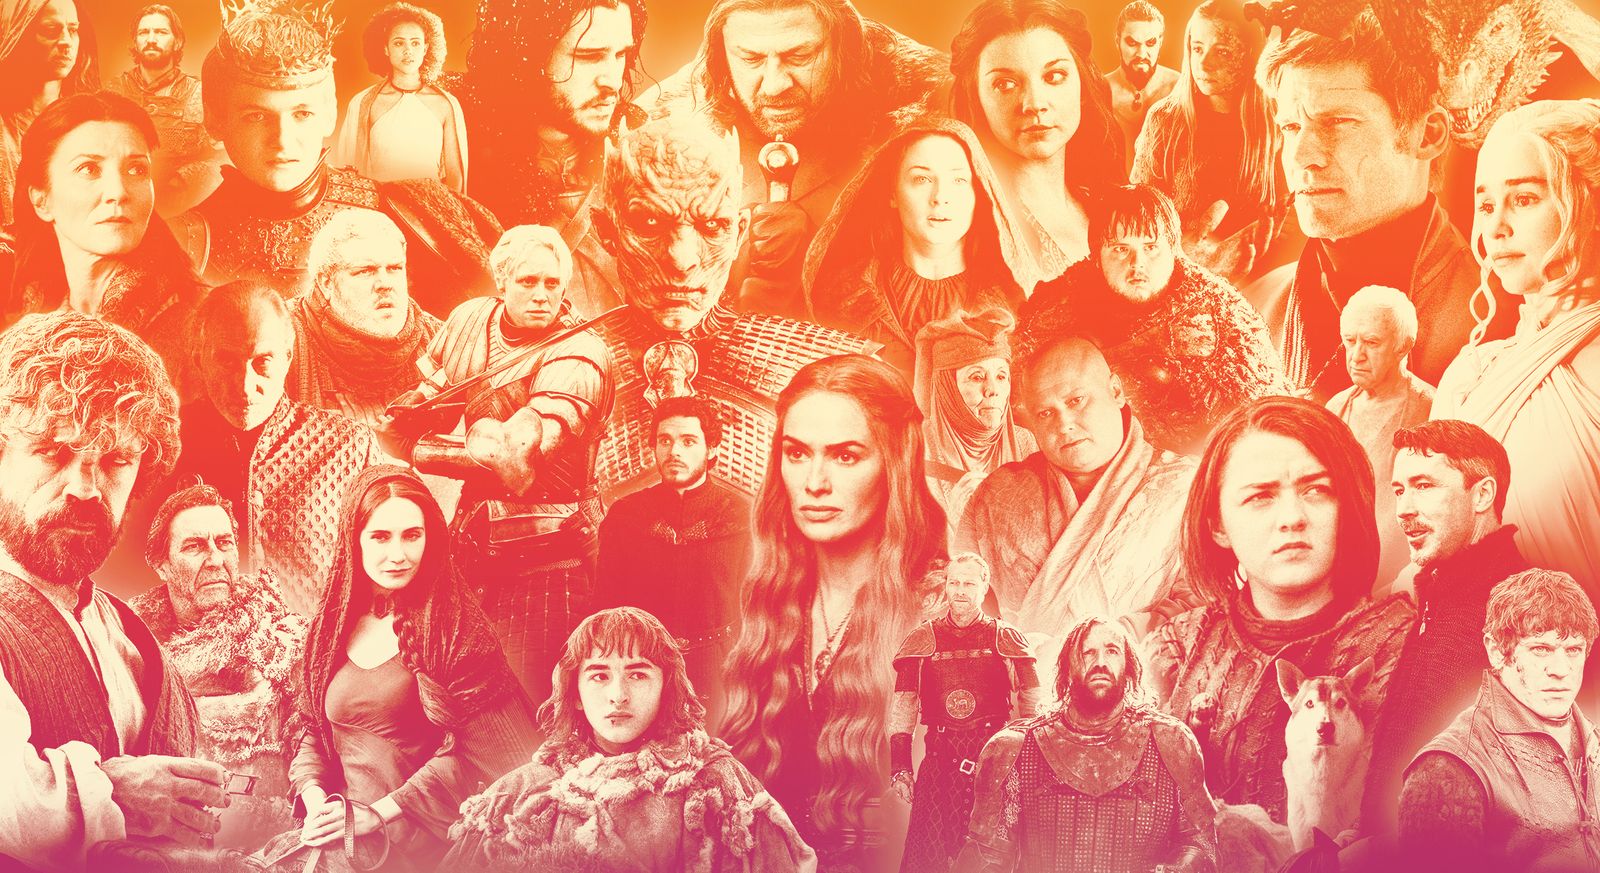 A Basic Guide To HBOs Game Of Thrones